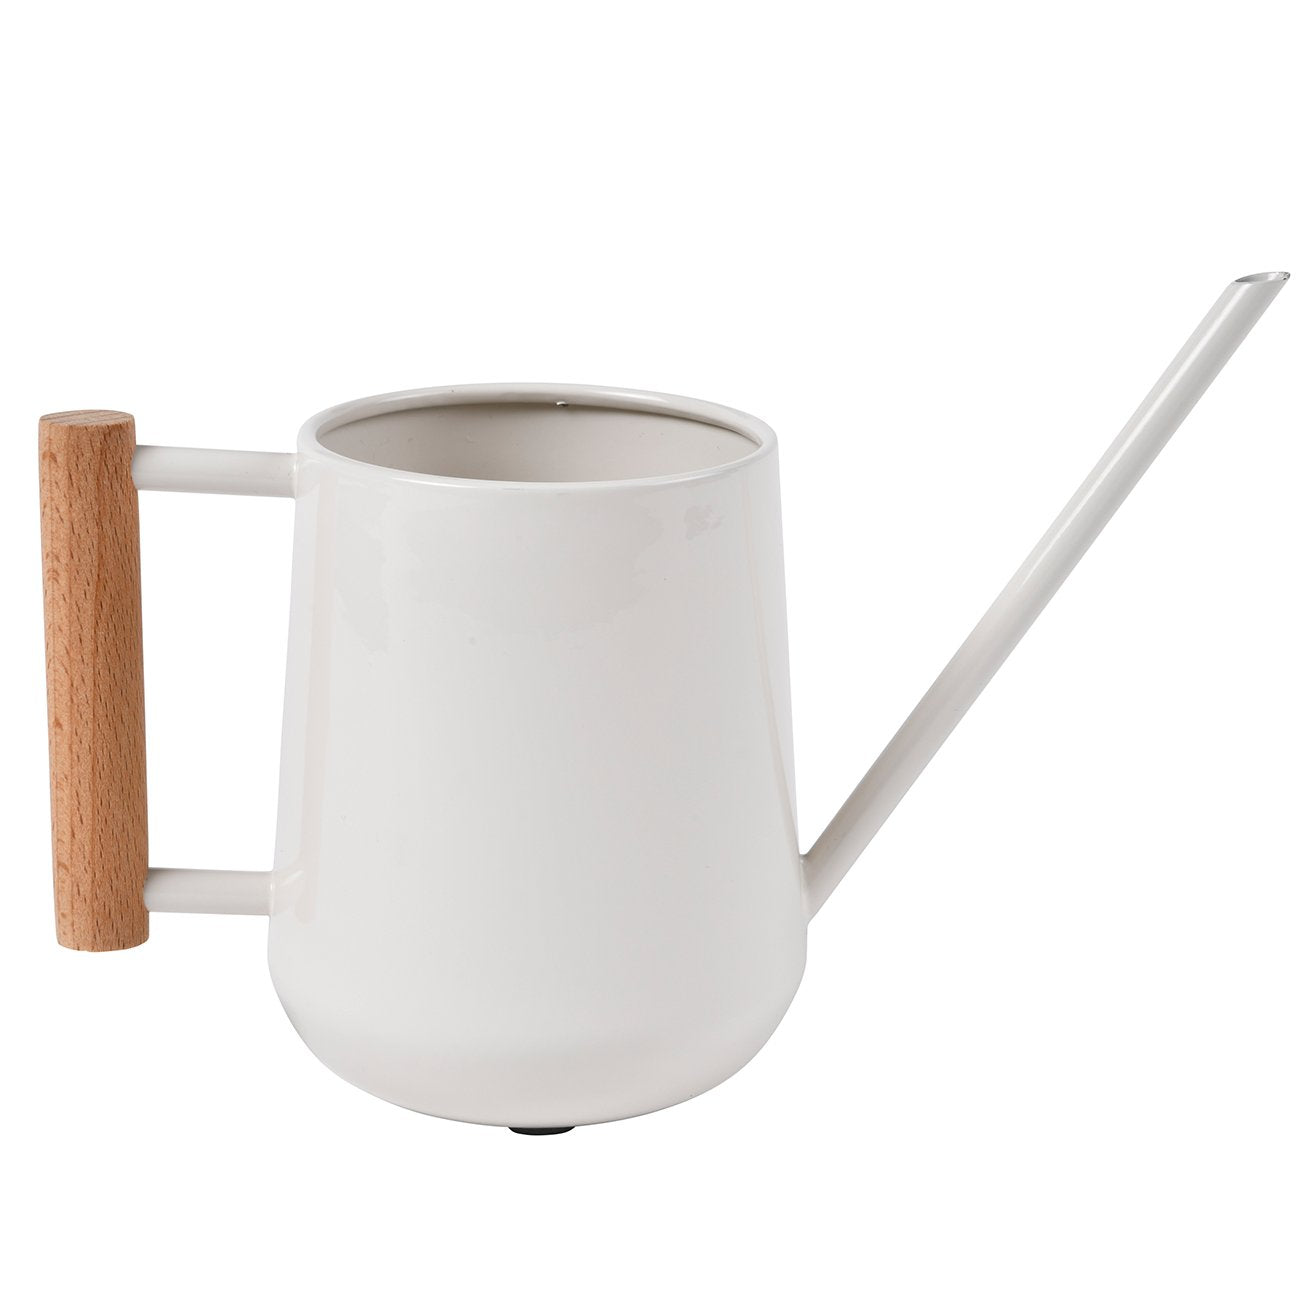 This stylish indoor watering can is the perfect marriage of design and performance. The slender spout is perfect for delivering water just where it’s needed – and nowhere else.